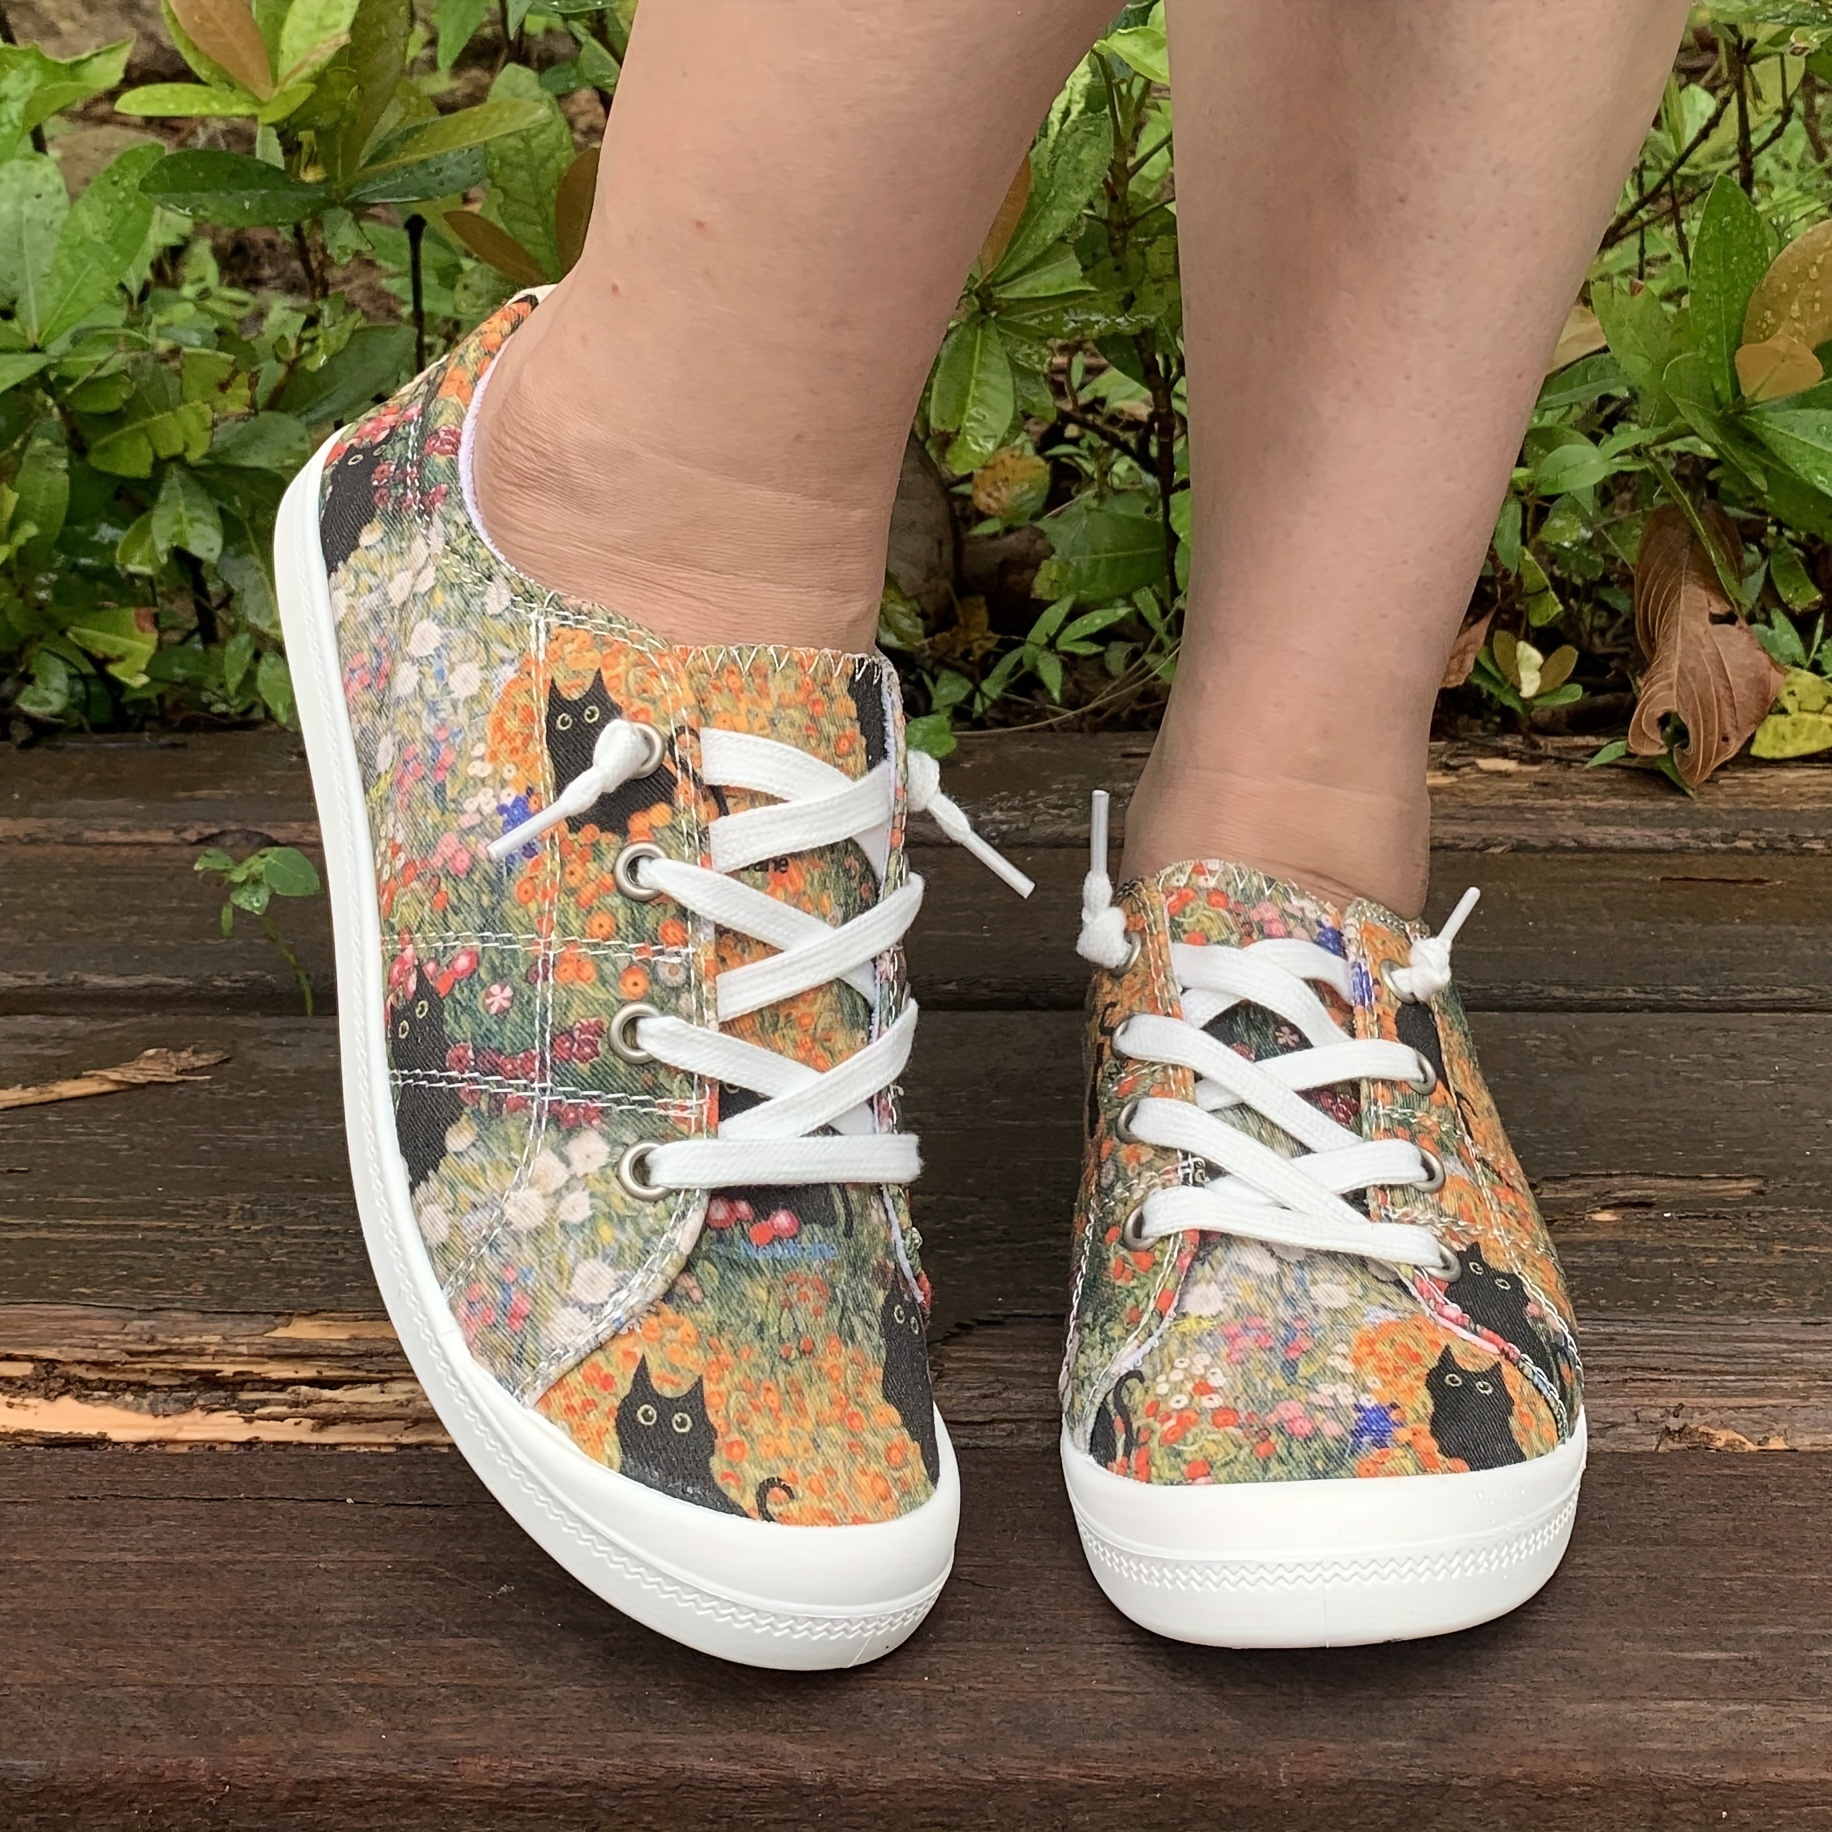 

Women's Floral Cat Print Canvas Sneakers, Slip-on Lazy Shoes, Comfortable Soft Sole, Versatile Casual Shoes For All Seasons